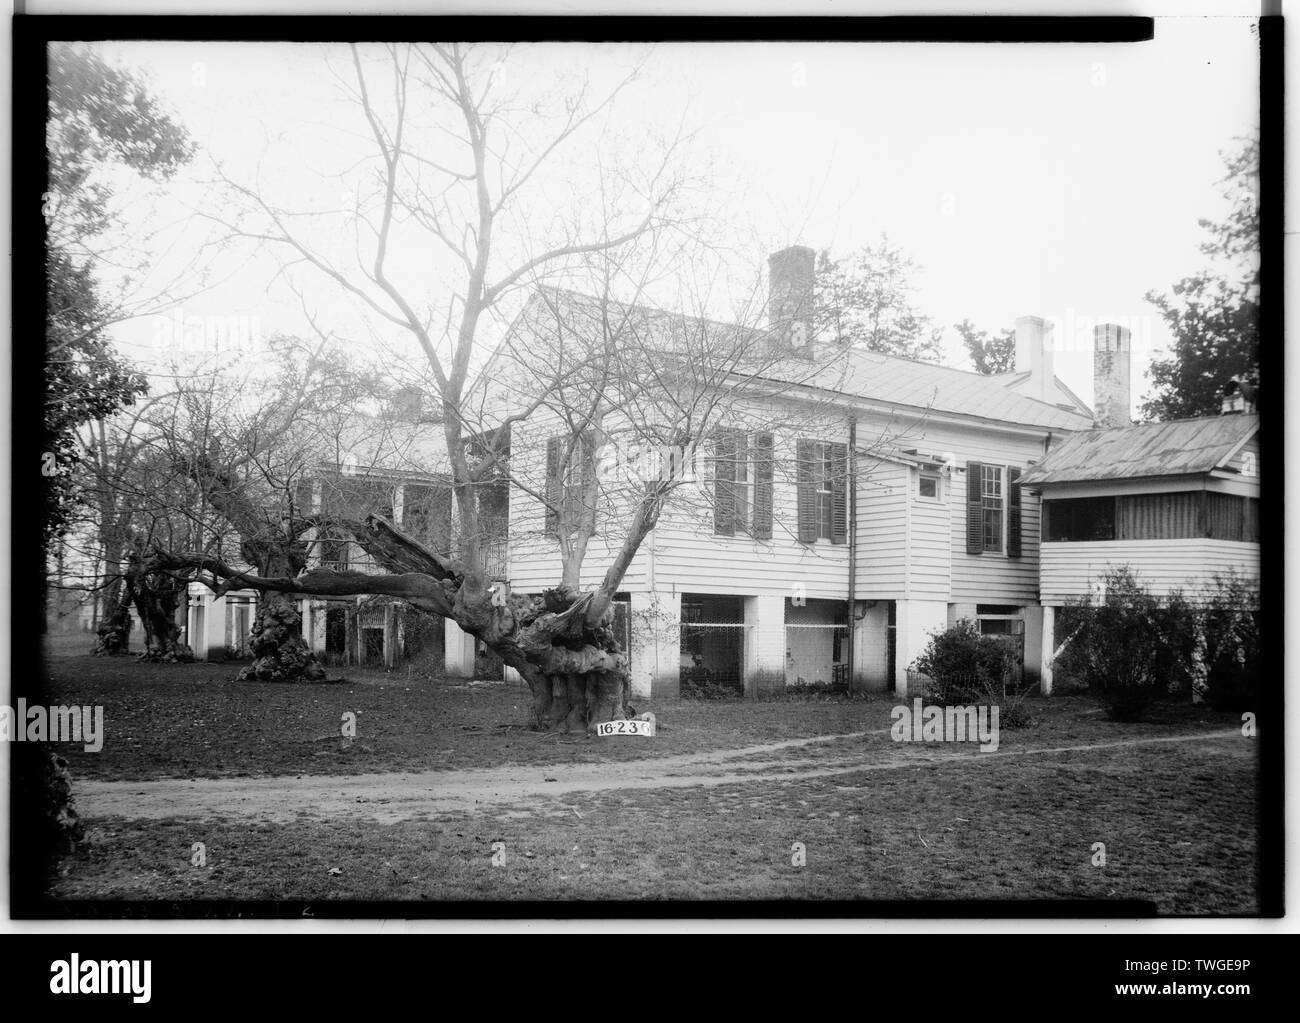 Historic American Buildings Survey W. N. Manning, Photographer, April 7, 1934. REAR VIEW - Governor Samuel Pickens House, State Route 14, Sawyerville, Hale County, AL Stock Photo